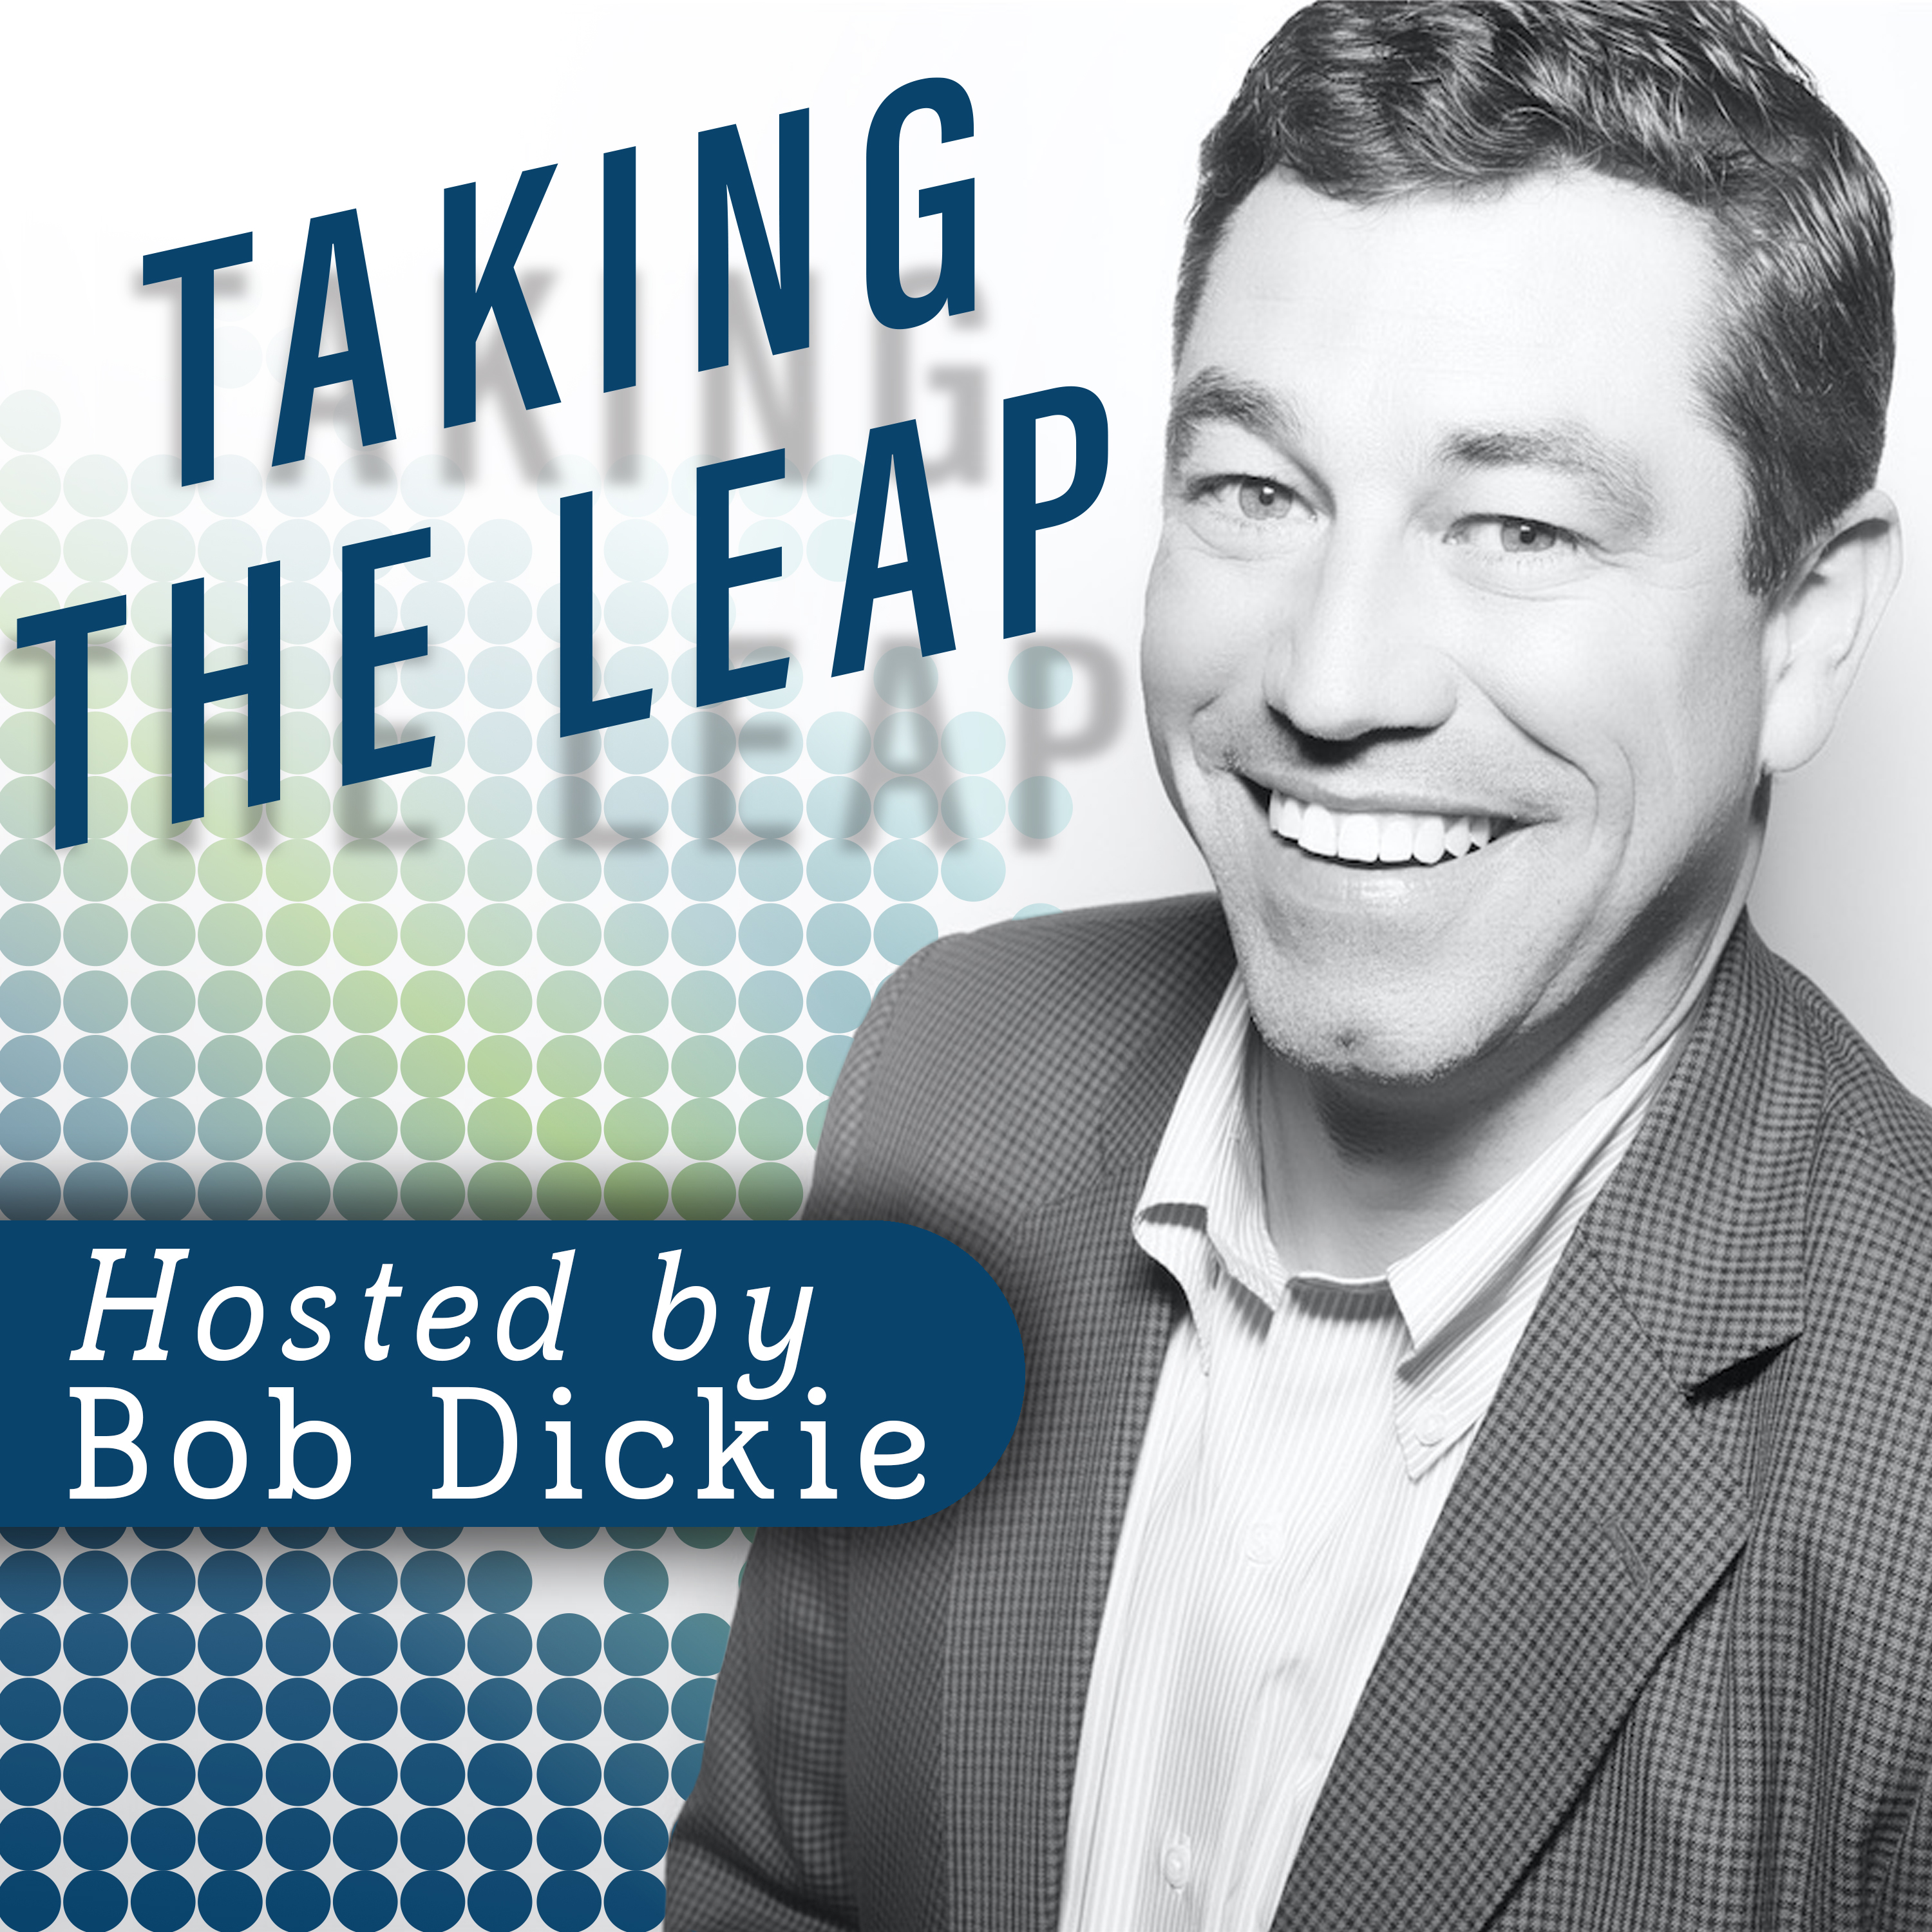 Launching a Podcast Called Taking the Leap with Bob Dickie